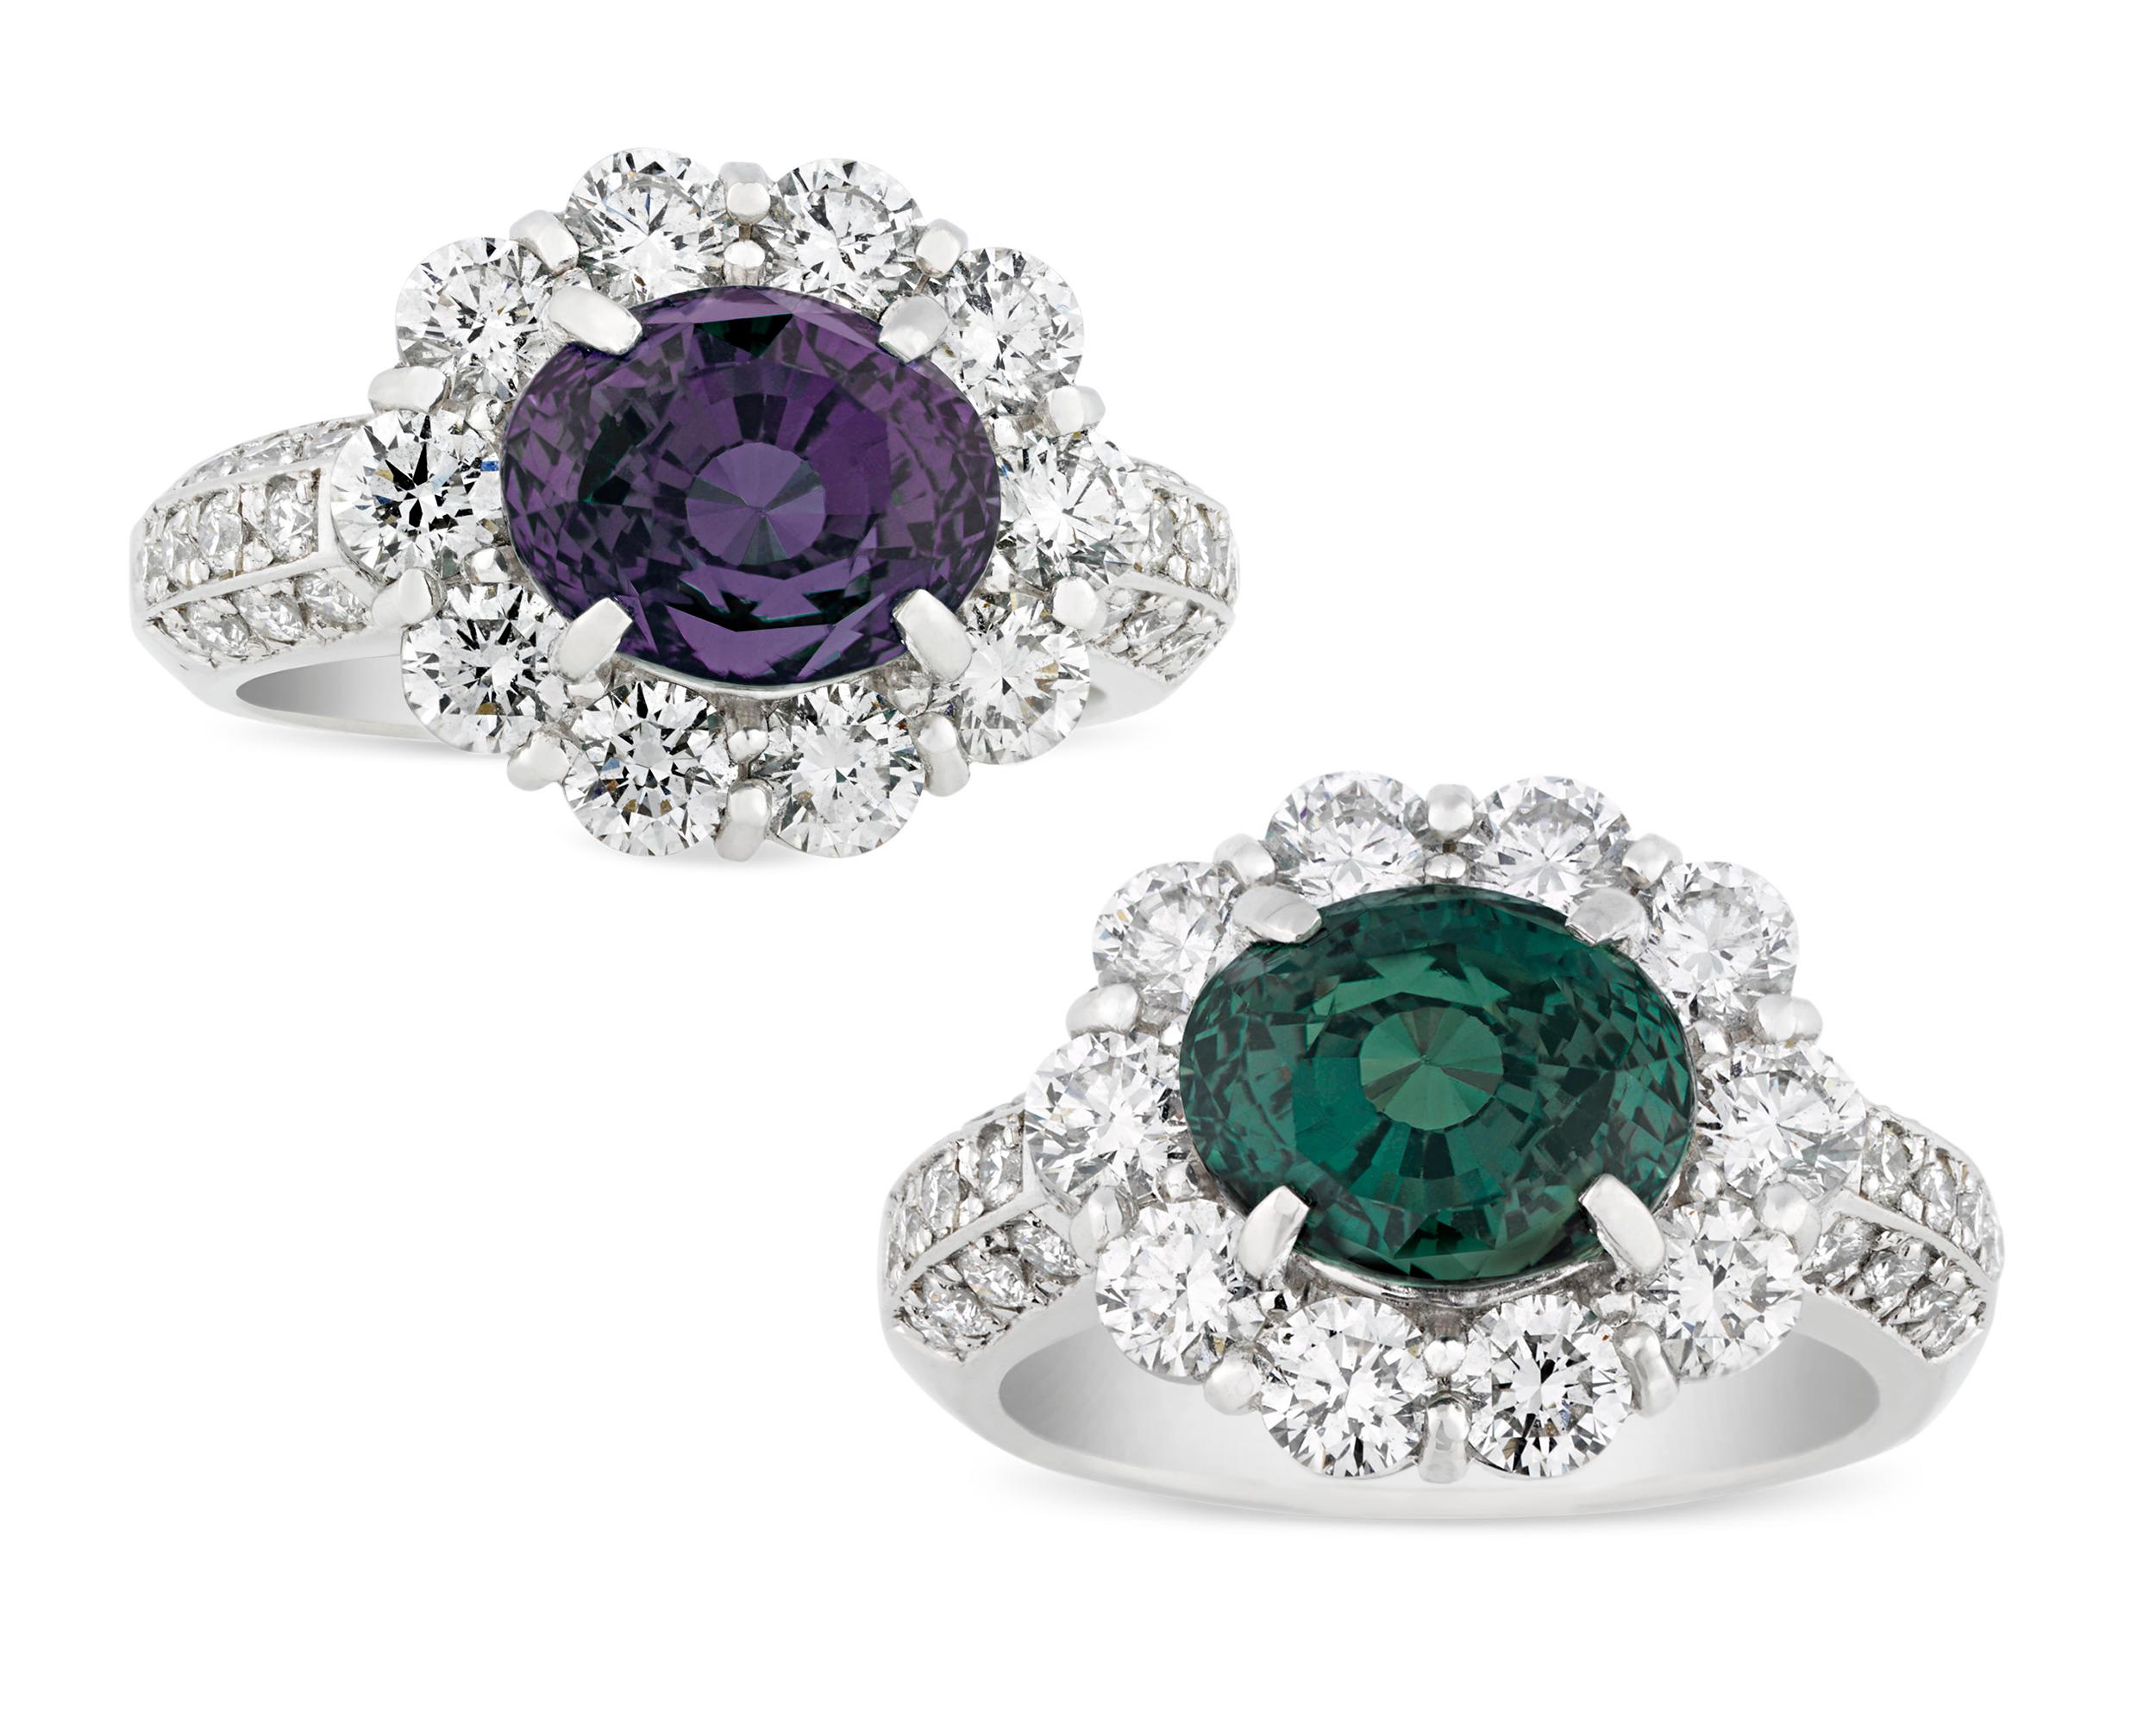 Weighing 4.52 carats, this captivating oval-cut alexandrite exhibits the unique color change for which these rare stones are renowned. Displaying a lovely bluish-green hue in daylight, the remarkable gem exhibits a beautiful purple color when